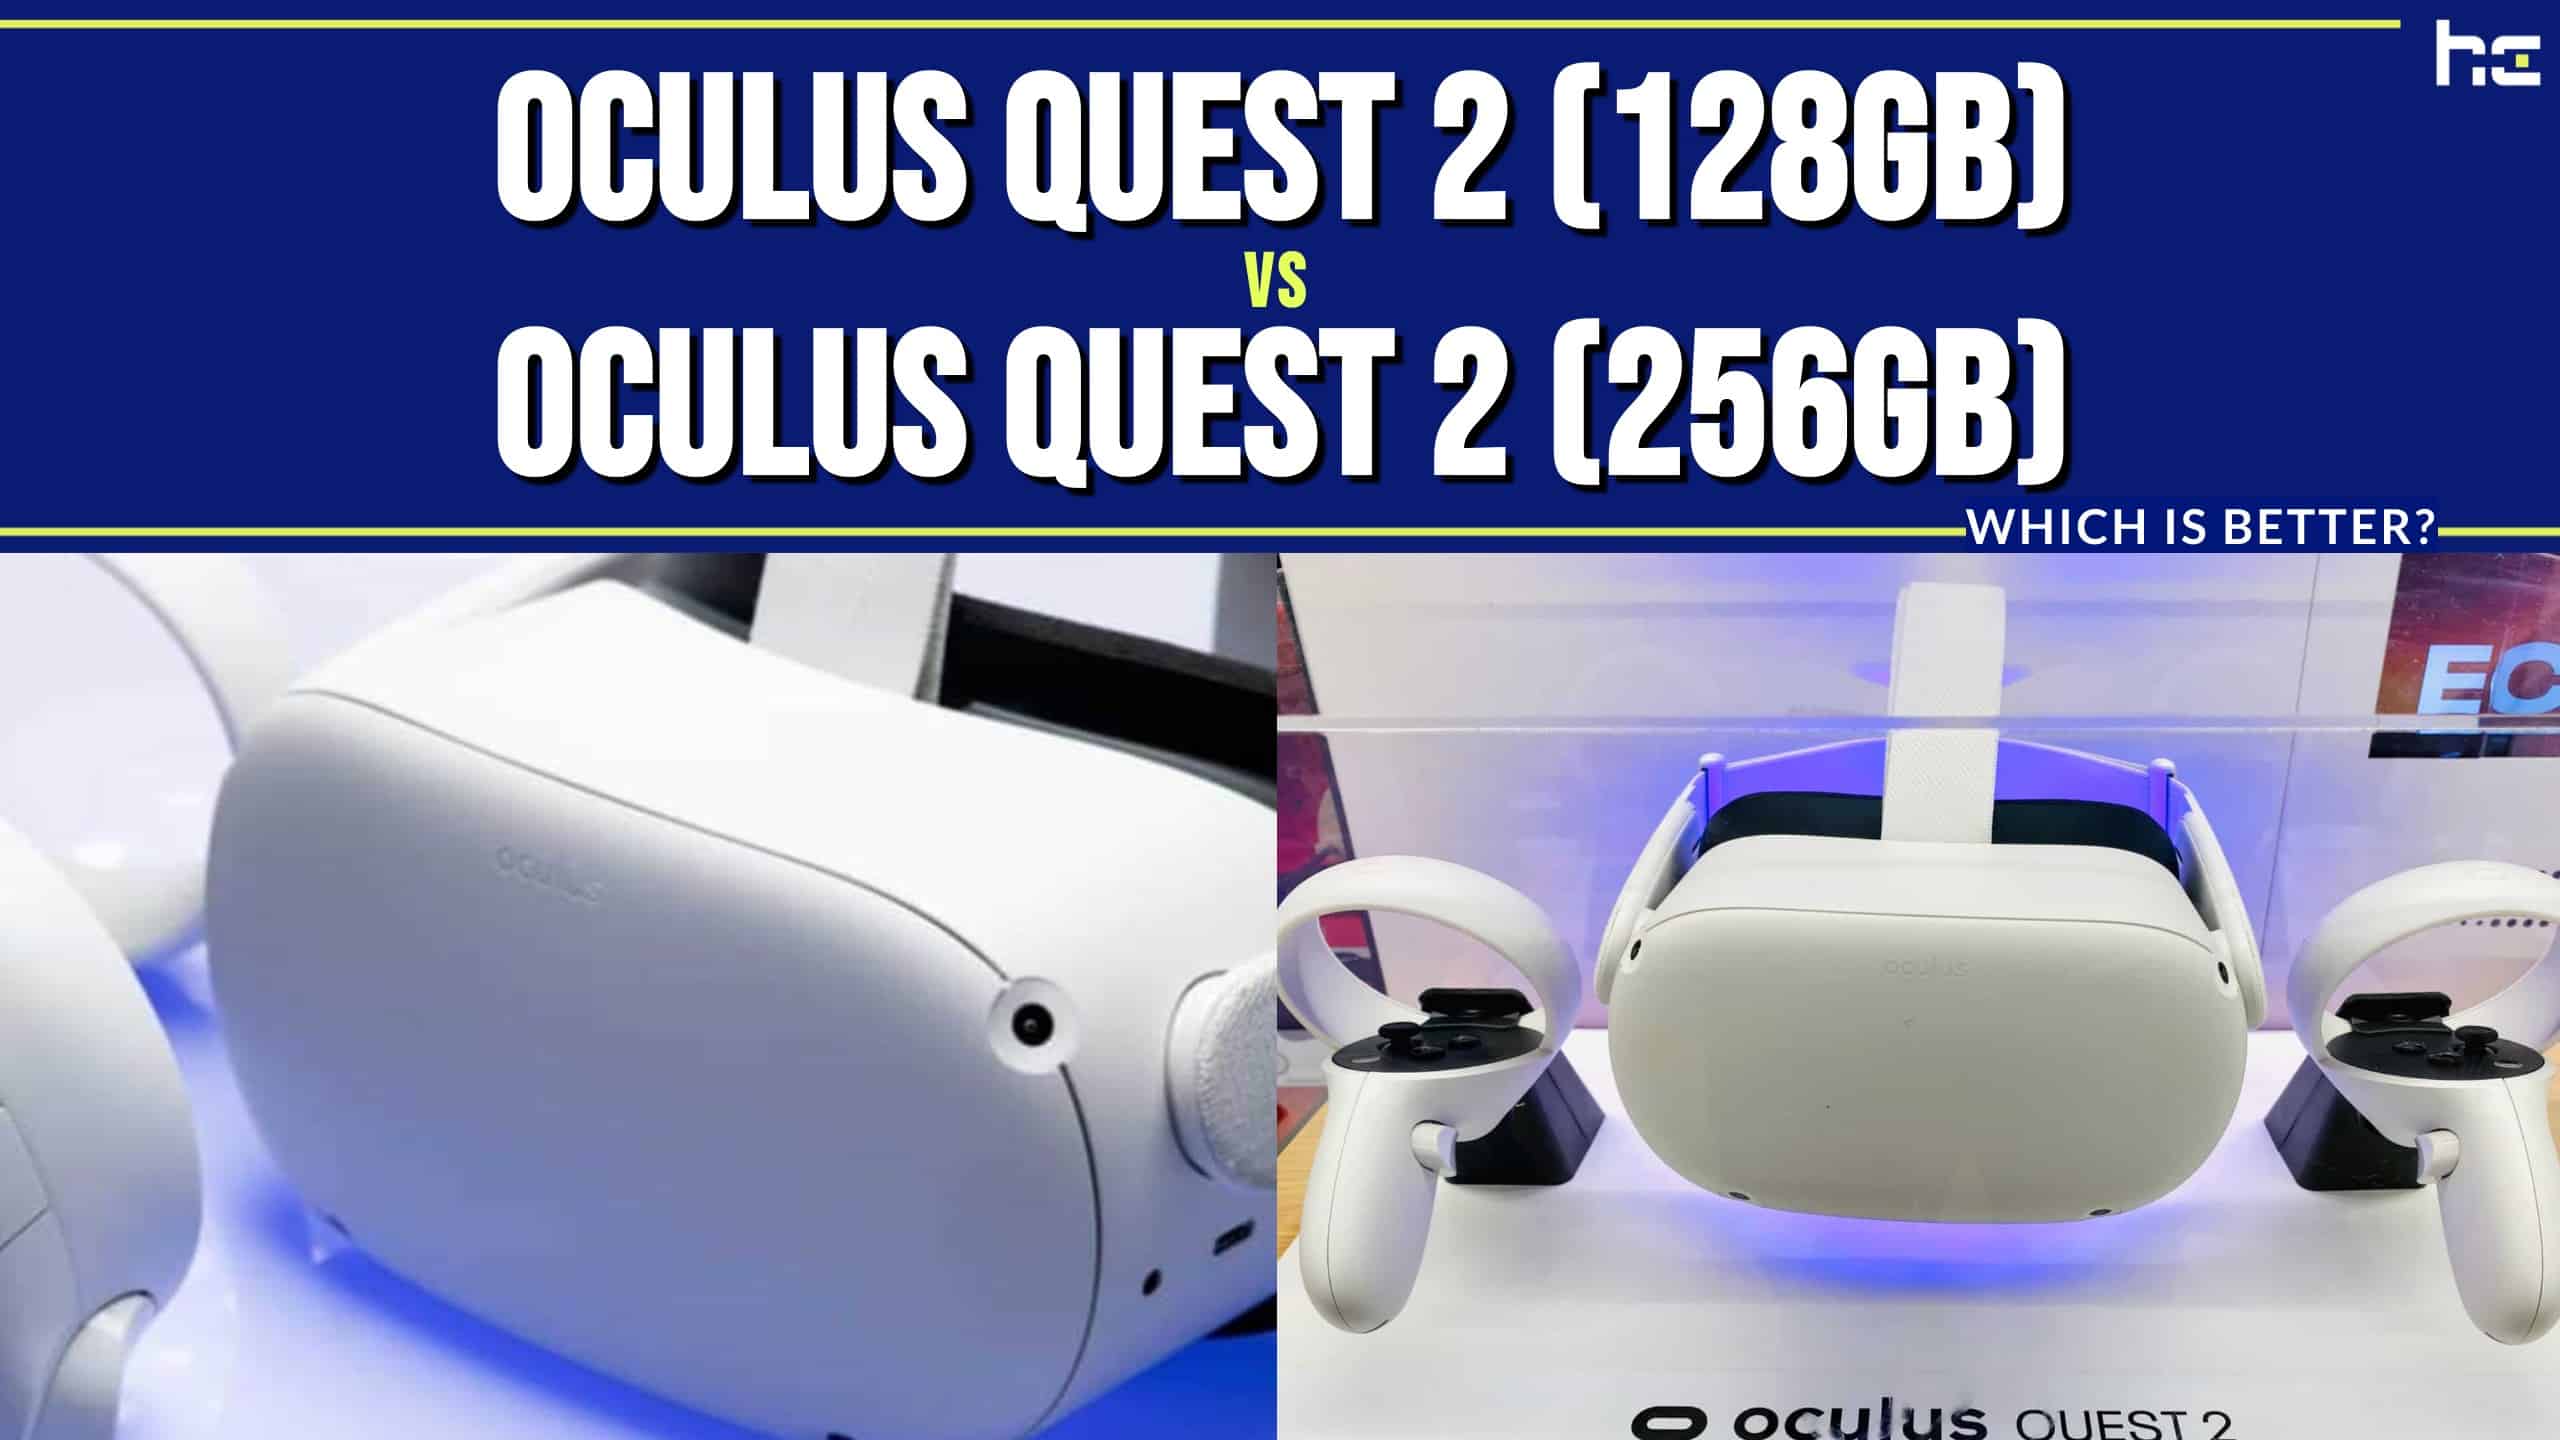 Quest 2 (Oculus) 128GB vs. 256GB: Which is Better? - History-Computer